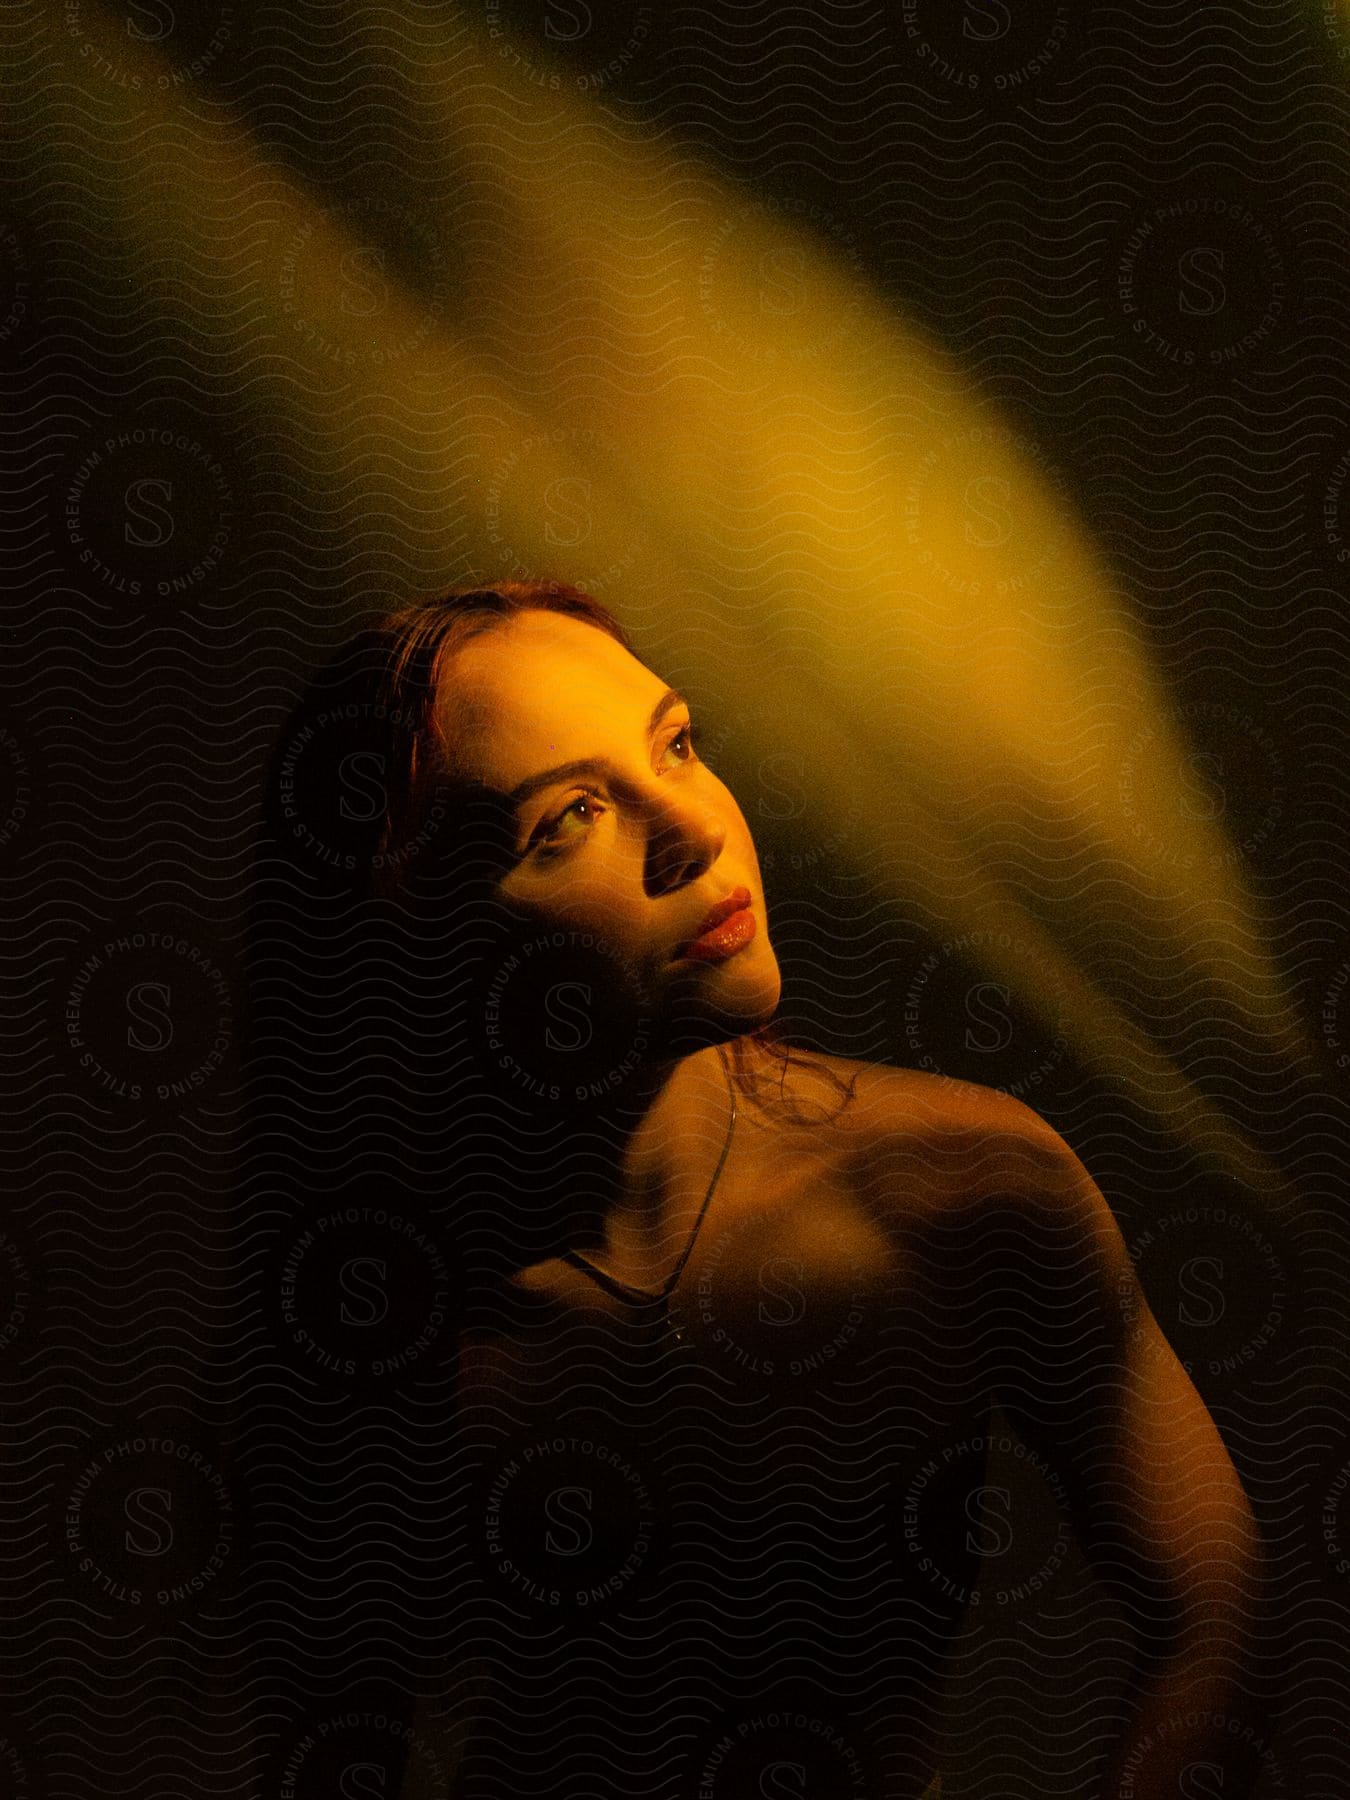 A woman with bare shoulders posed looking up into a golden light